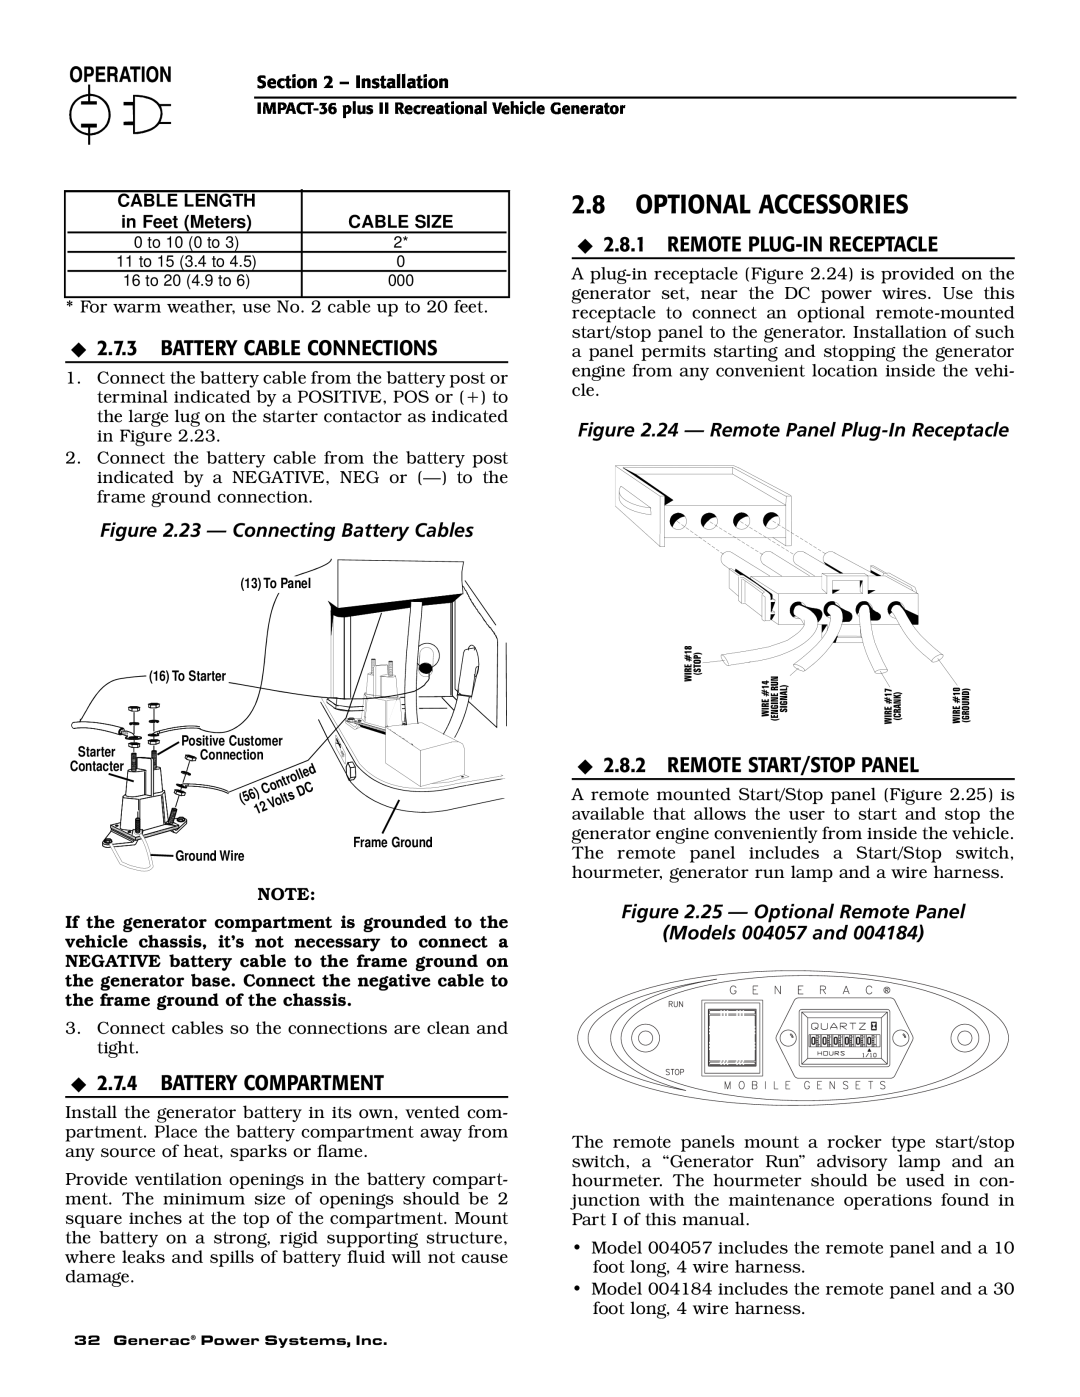 Generac 00941-3 2.8OPTIONAL ACCESSORIES, Battery Cable Connections, Battery Compartment, Remote Plug-Inreceptacle 